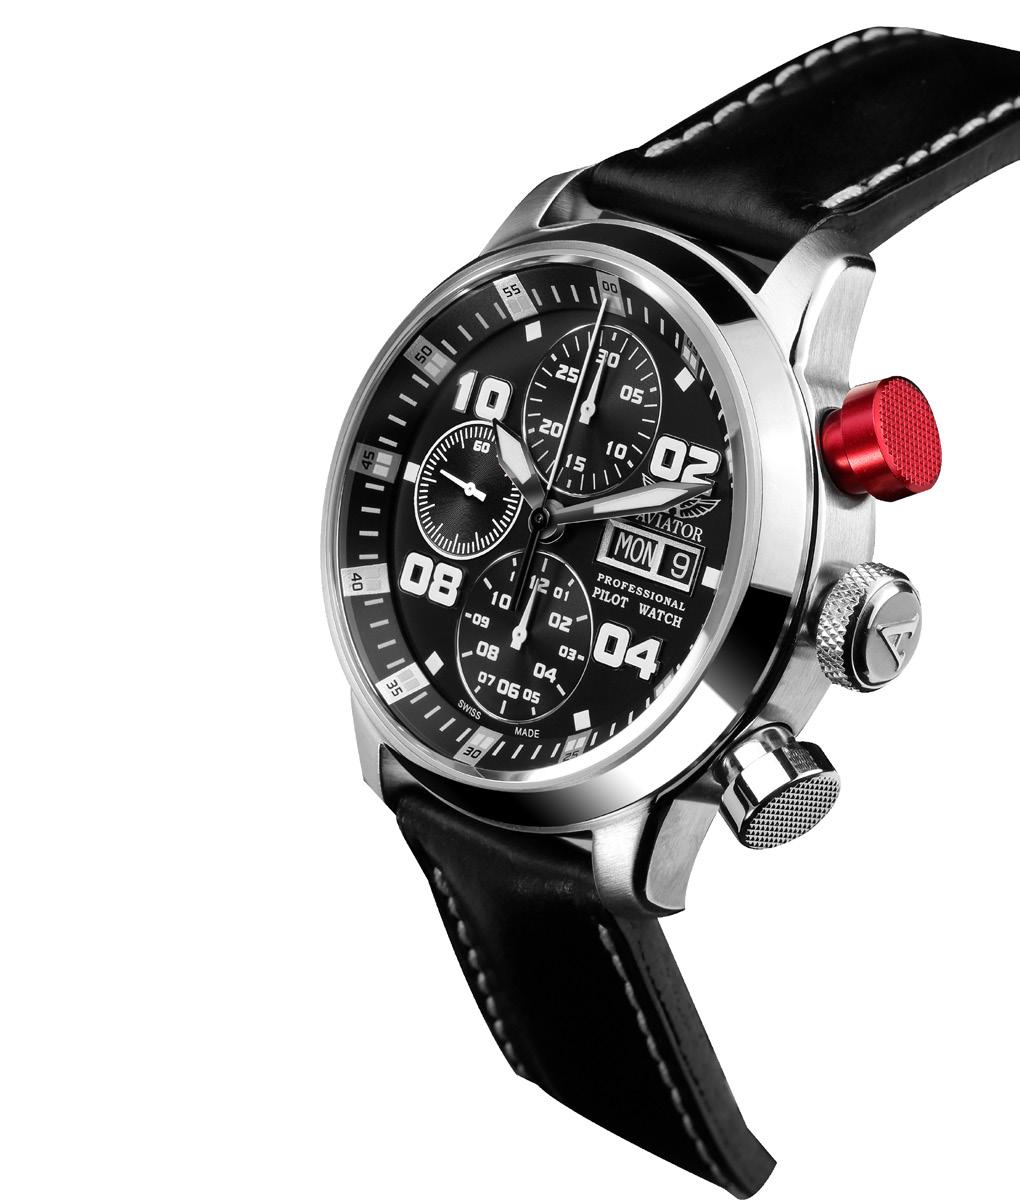 2014 Edition Functionality, precision and reliability: these are the attributes, which characterize the Professional Pilot s watch.